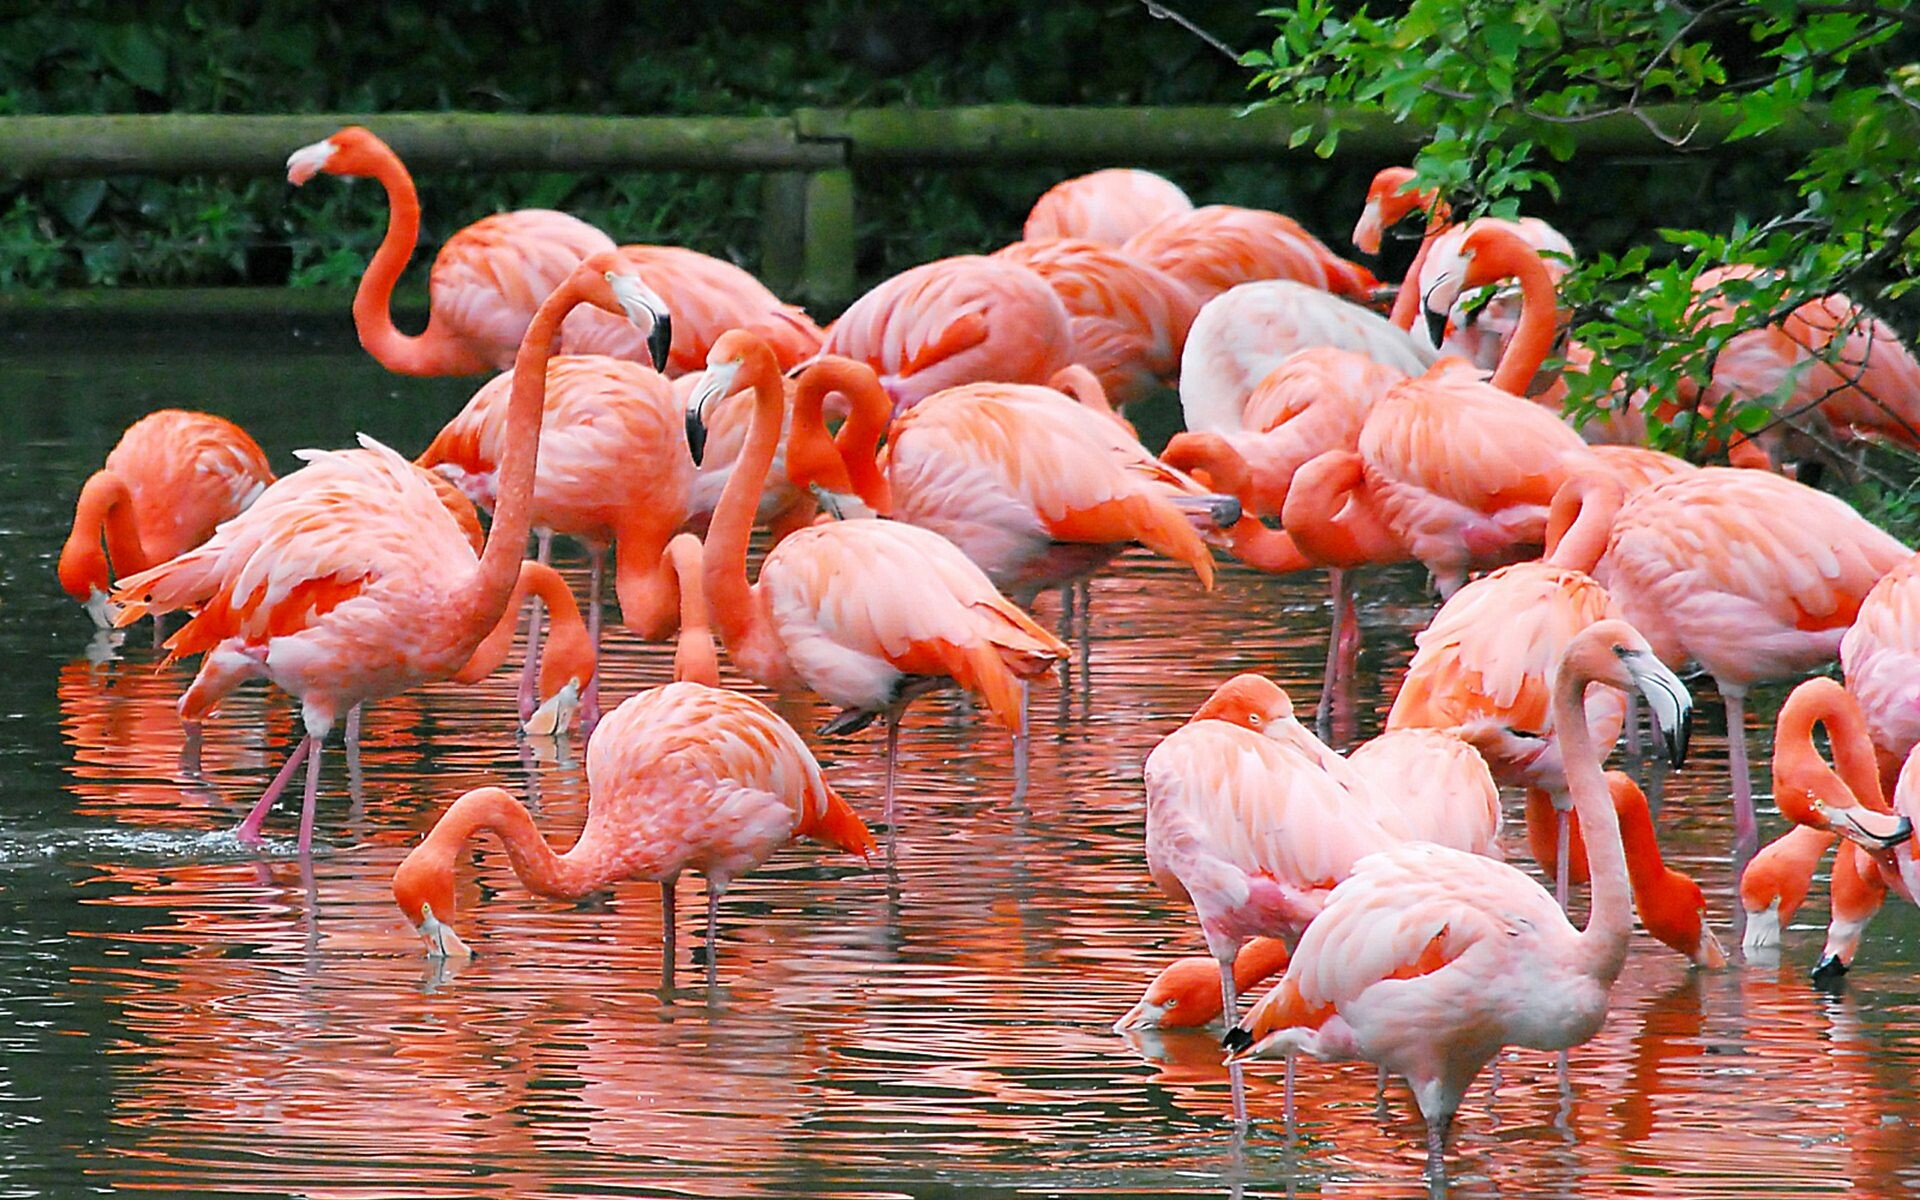 Flamingo: The Phoenicopteridae family, Live in colonies whose population can number in the thousands. 1920x1200 HD Wallpaper.